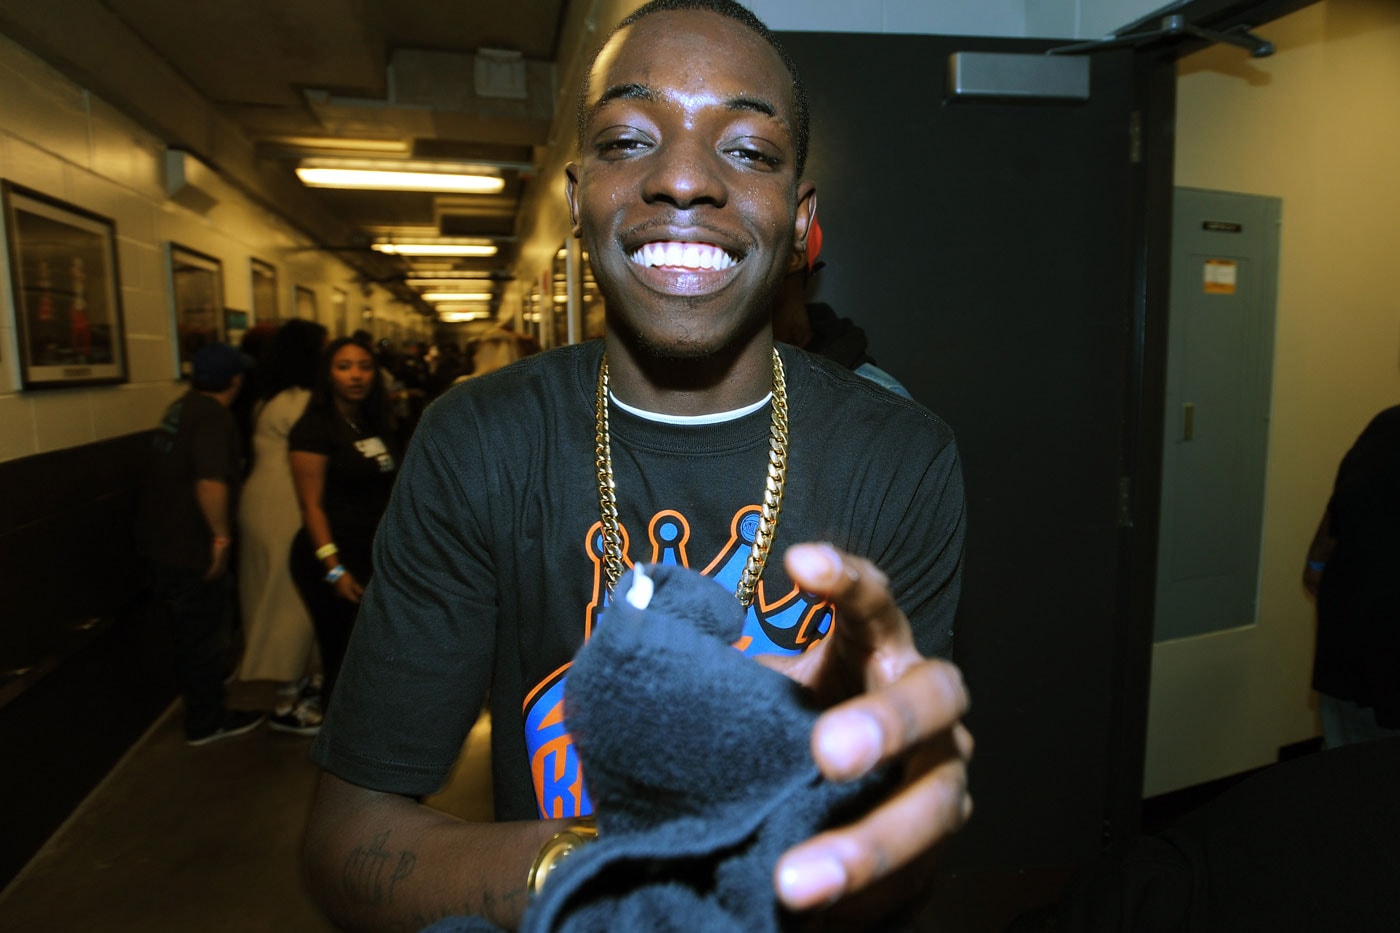 Bobby Shmurda Wants To Join Forces With Adele for a Strip Club Anthem